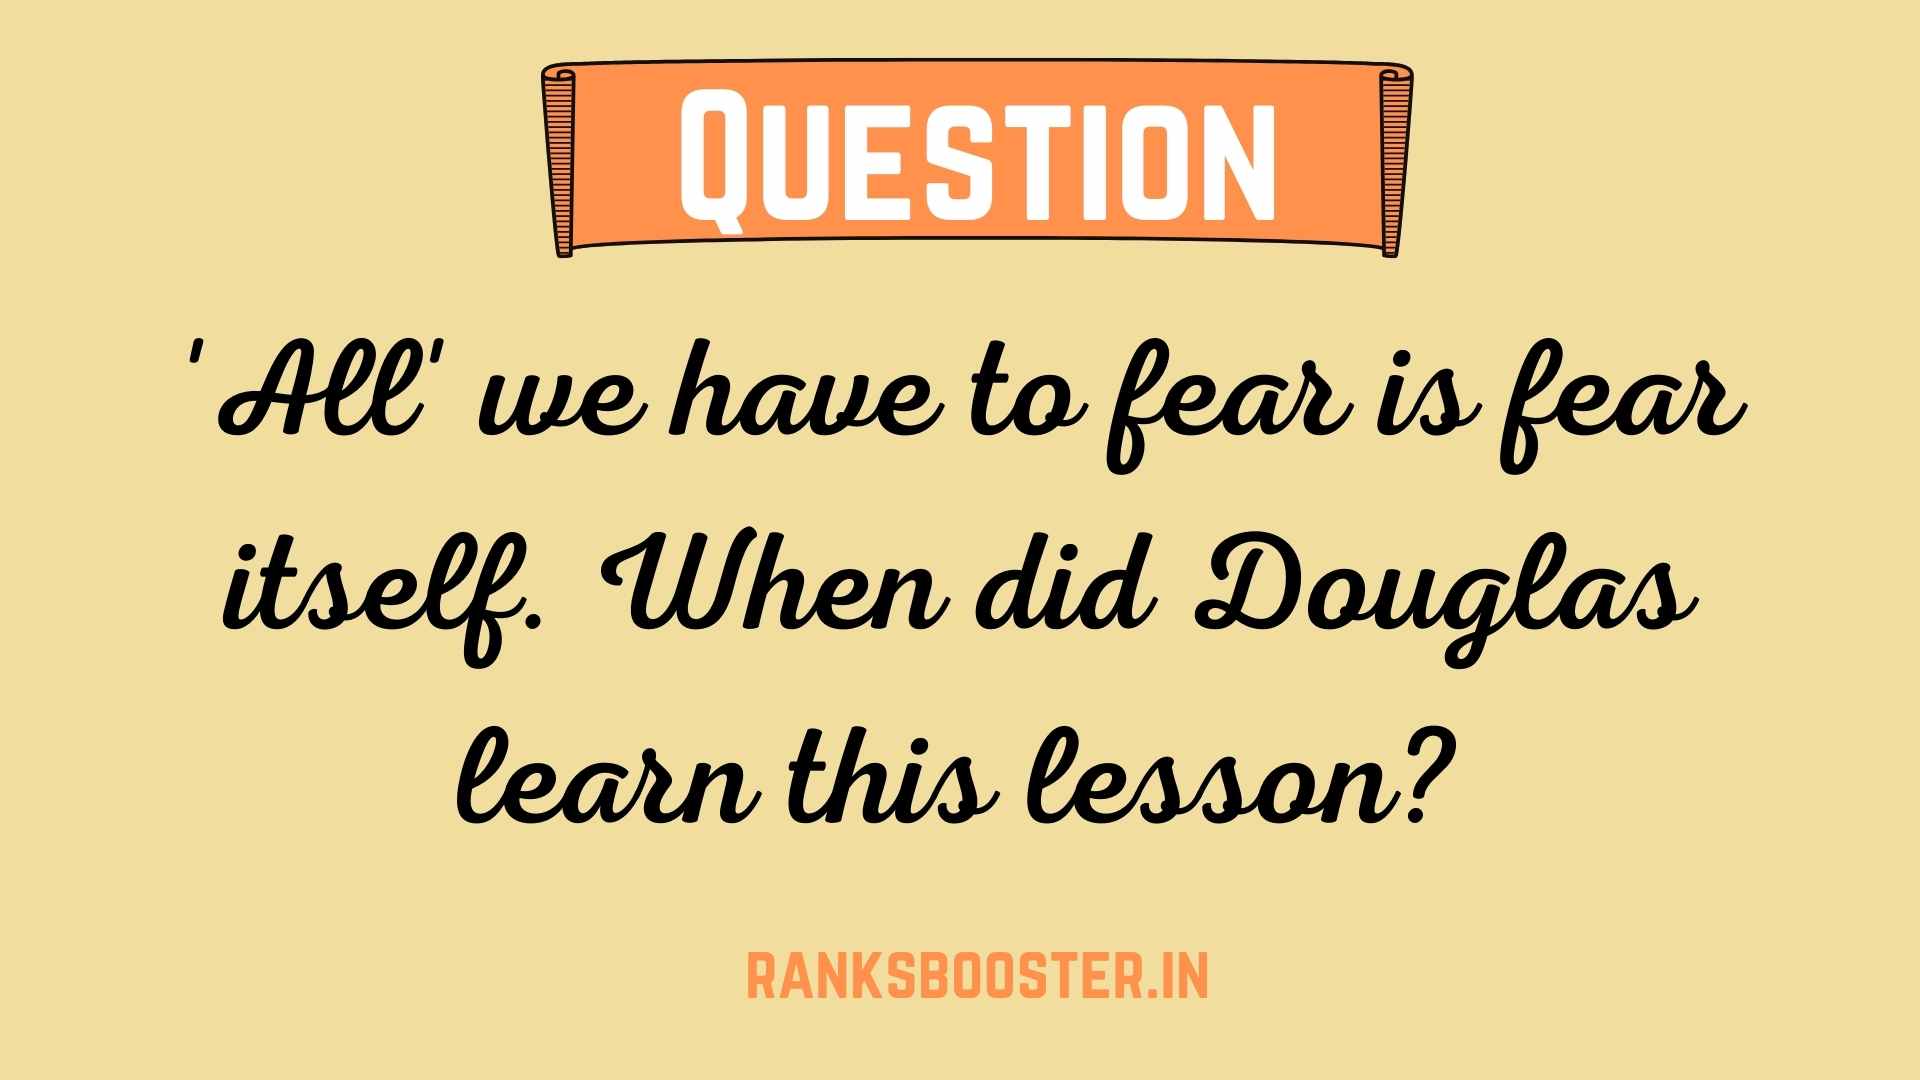 'All' we have to fear is fear itself. When did Douglas learn this lesson?